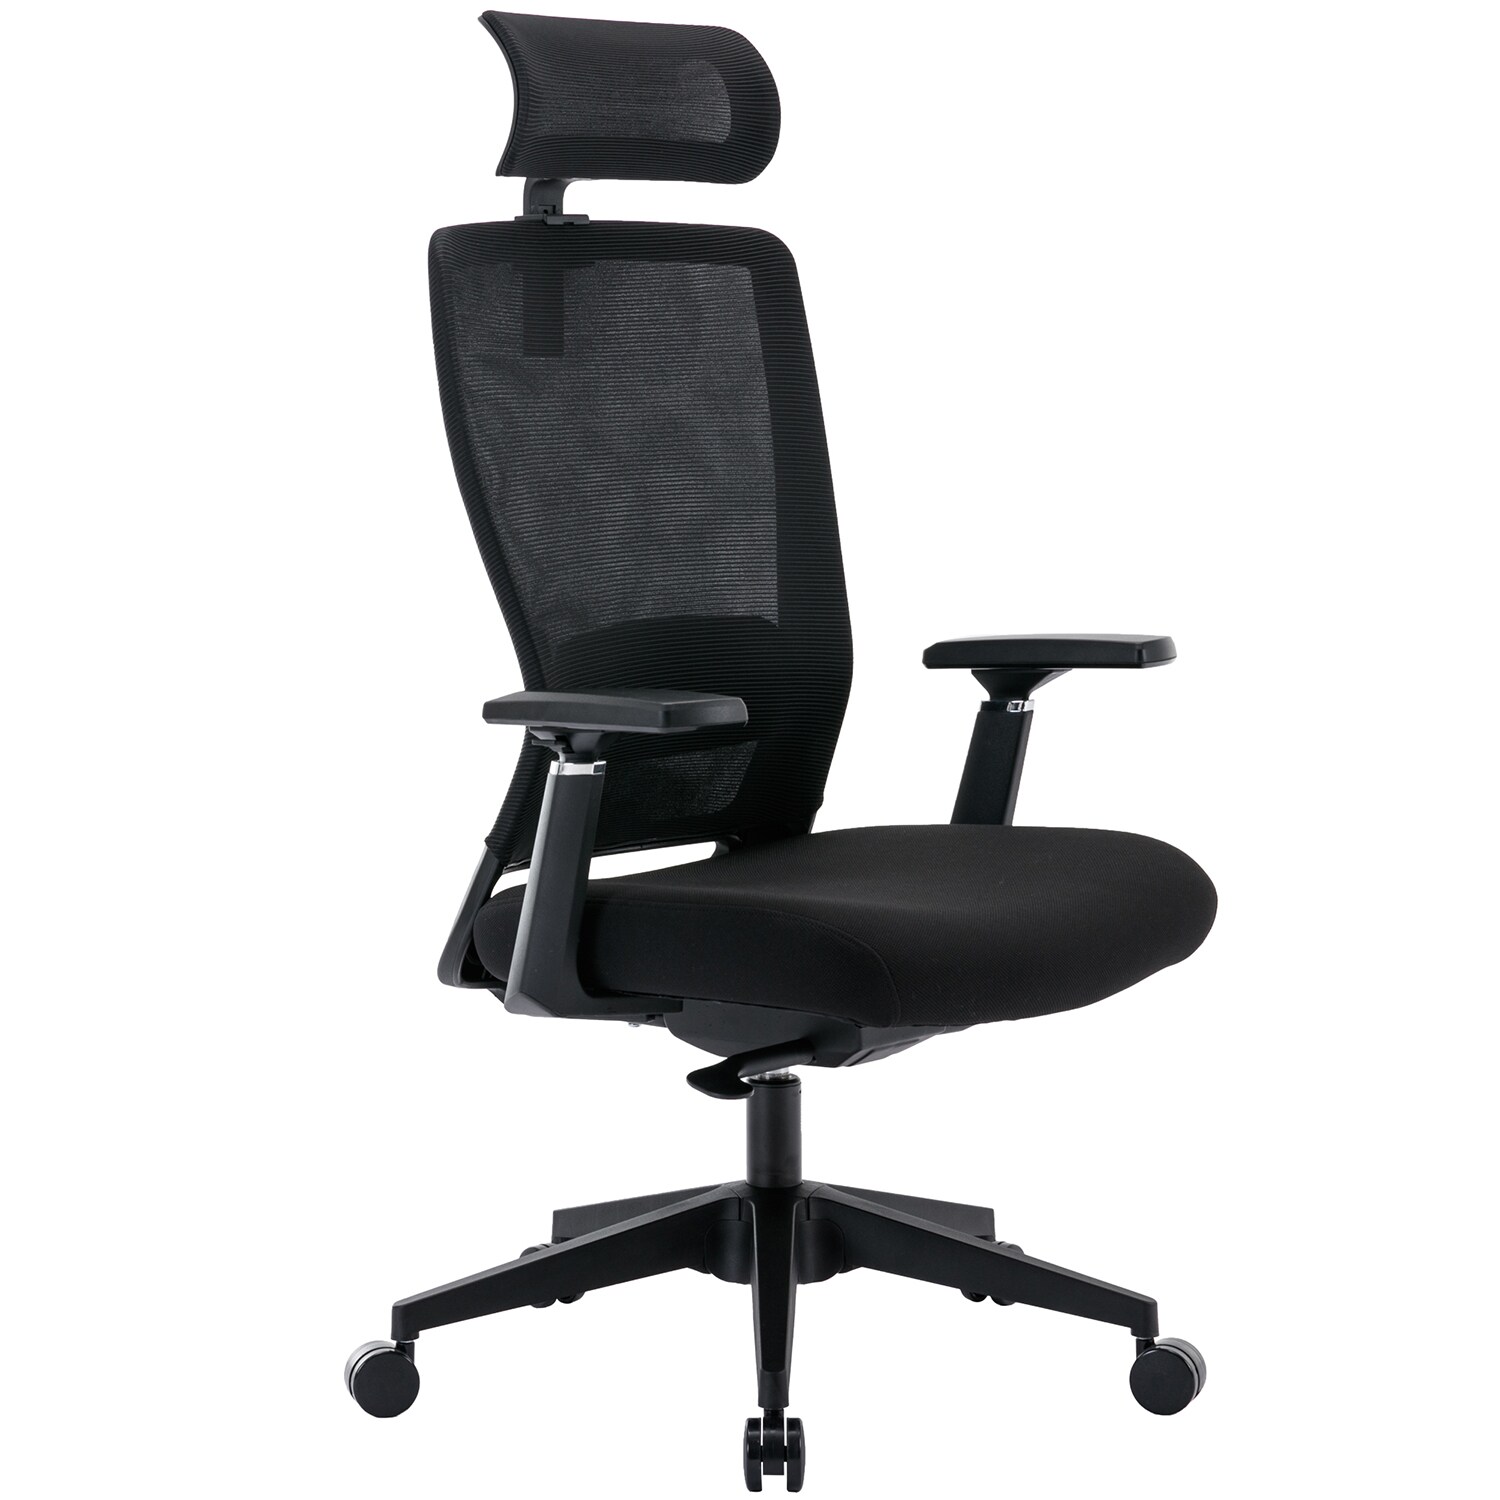 Office Chair, Desk Chairs Mesh Computer Desk Chair with Wheels Ergonomic, BLACK.